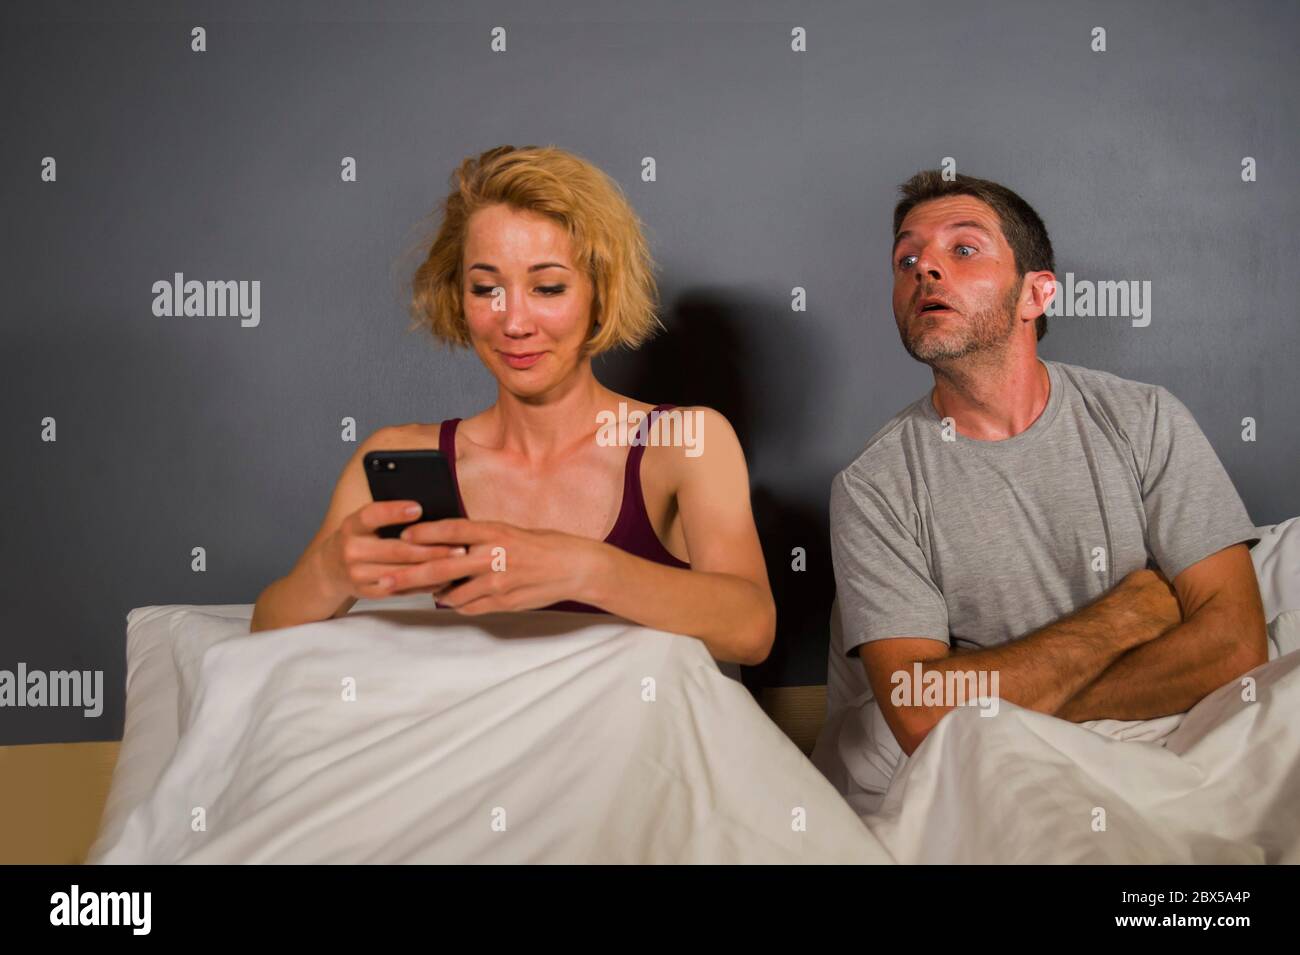 girlfriend or wife using mobile phone in bed and suspicious frustrated husband or boyfriend feeling upset suspecting betrayal and cheating in man woma Stock Photo